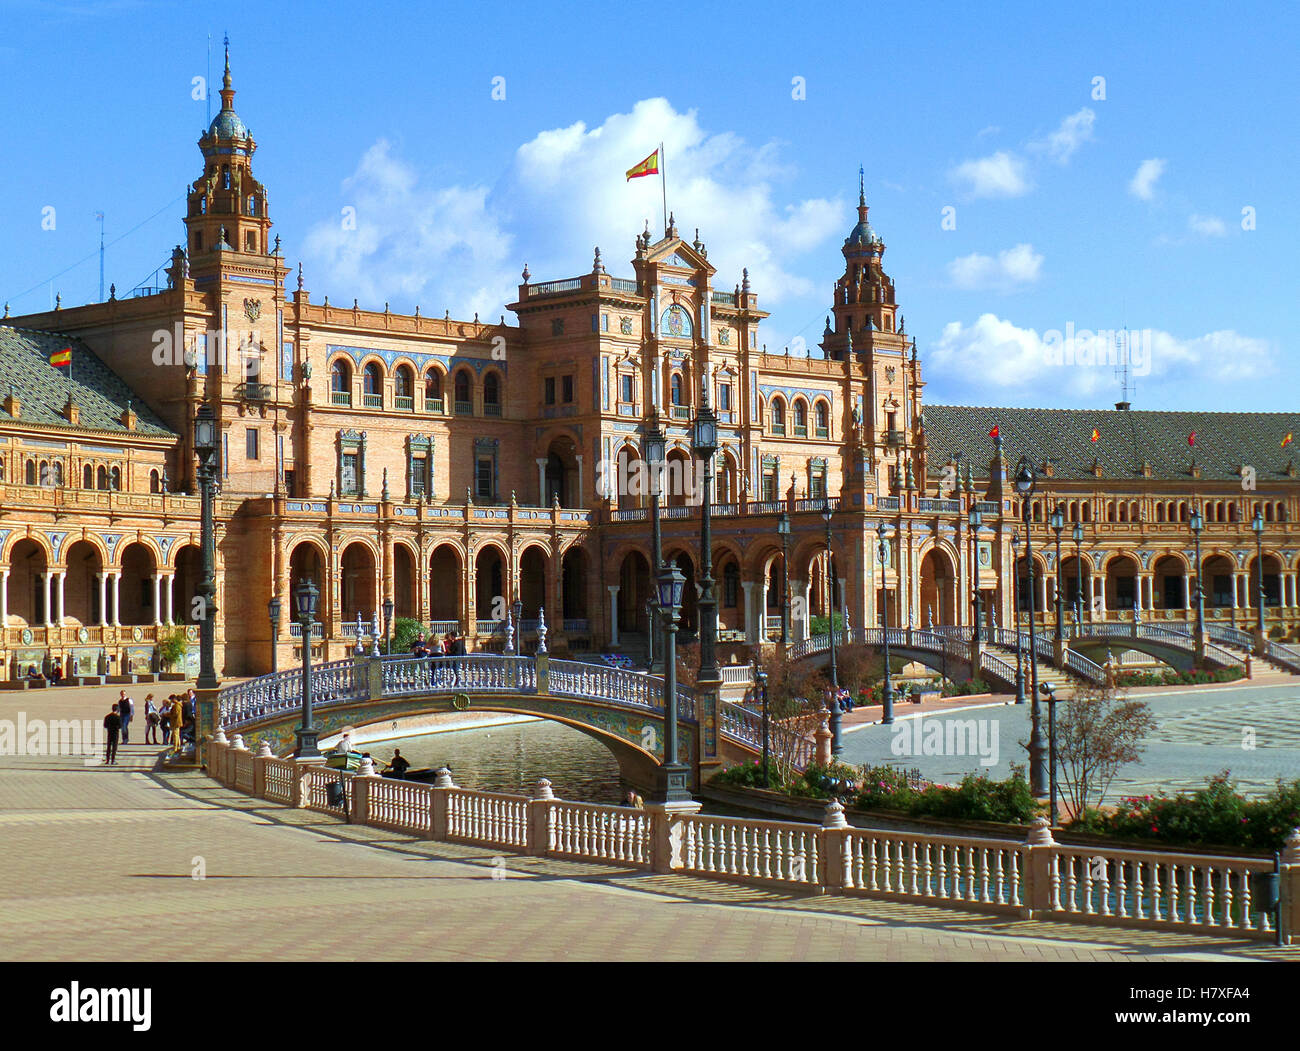 Stunning Architecture of the Famous Plaza de Espana under Blue Sky, Seville in Spain Stock Photo